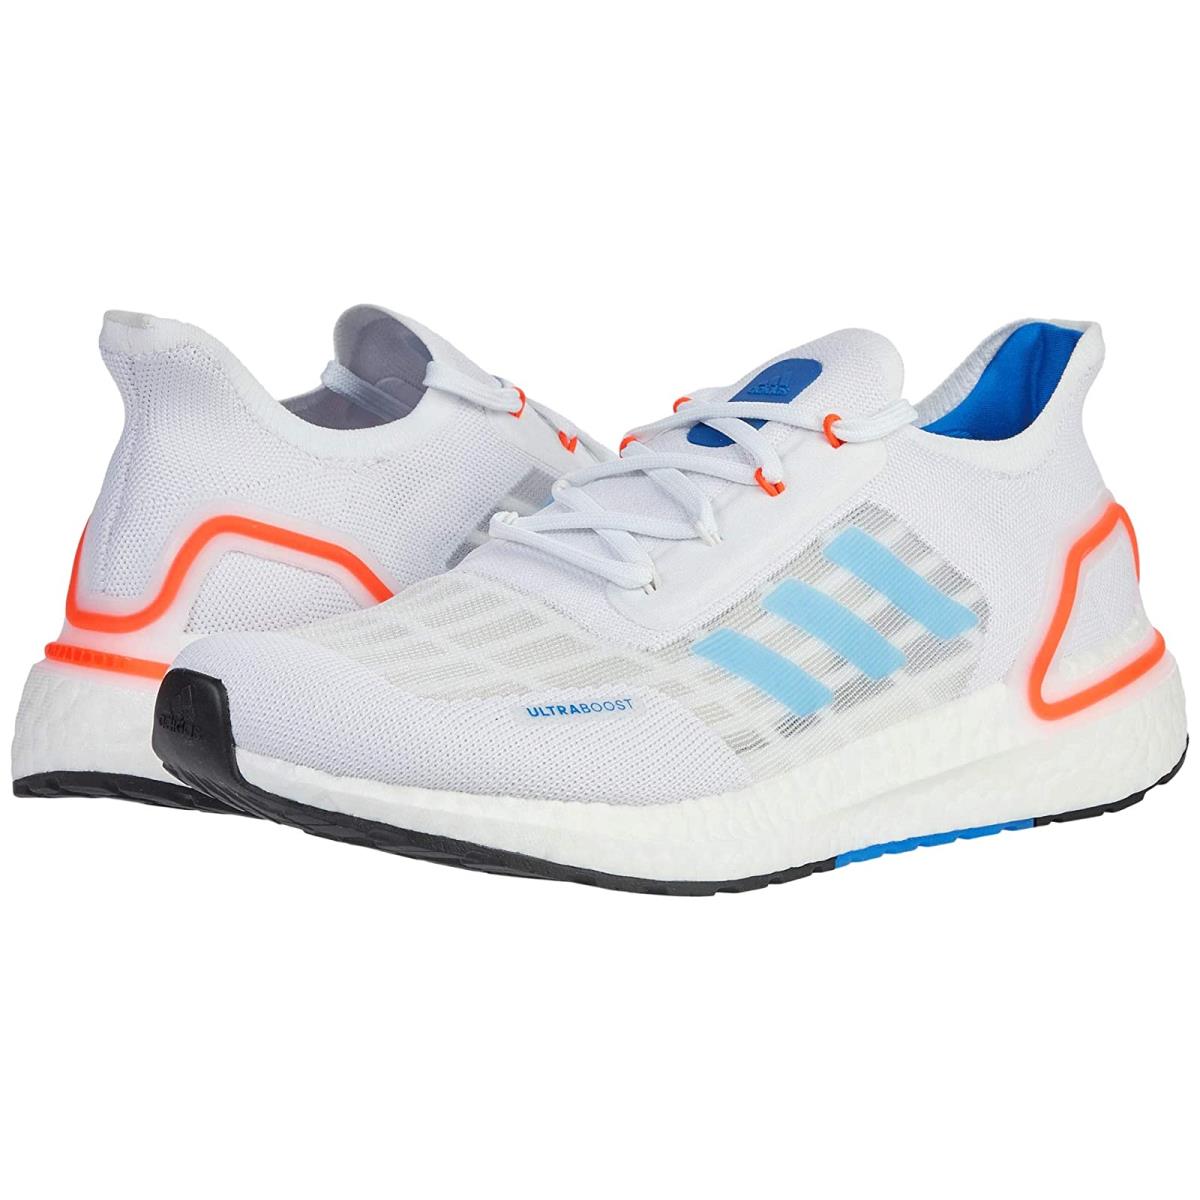 Man`s Sneakers Athletic Shoes Adidas Running Ultraboost S.rdy Footwear White/Glory Blue/Solar Red